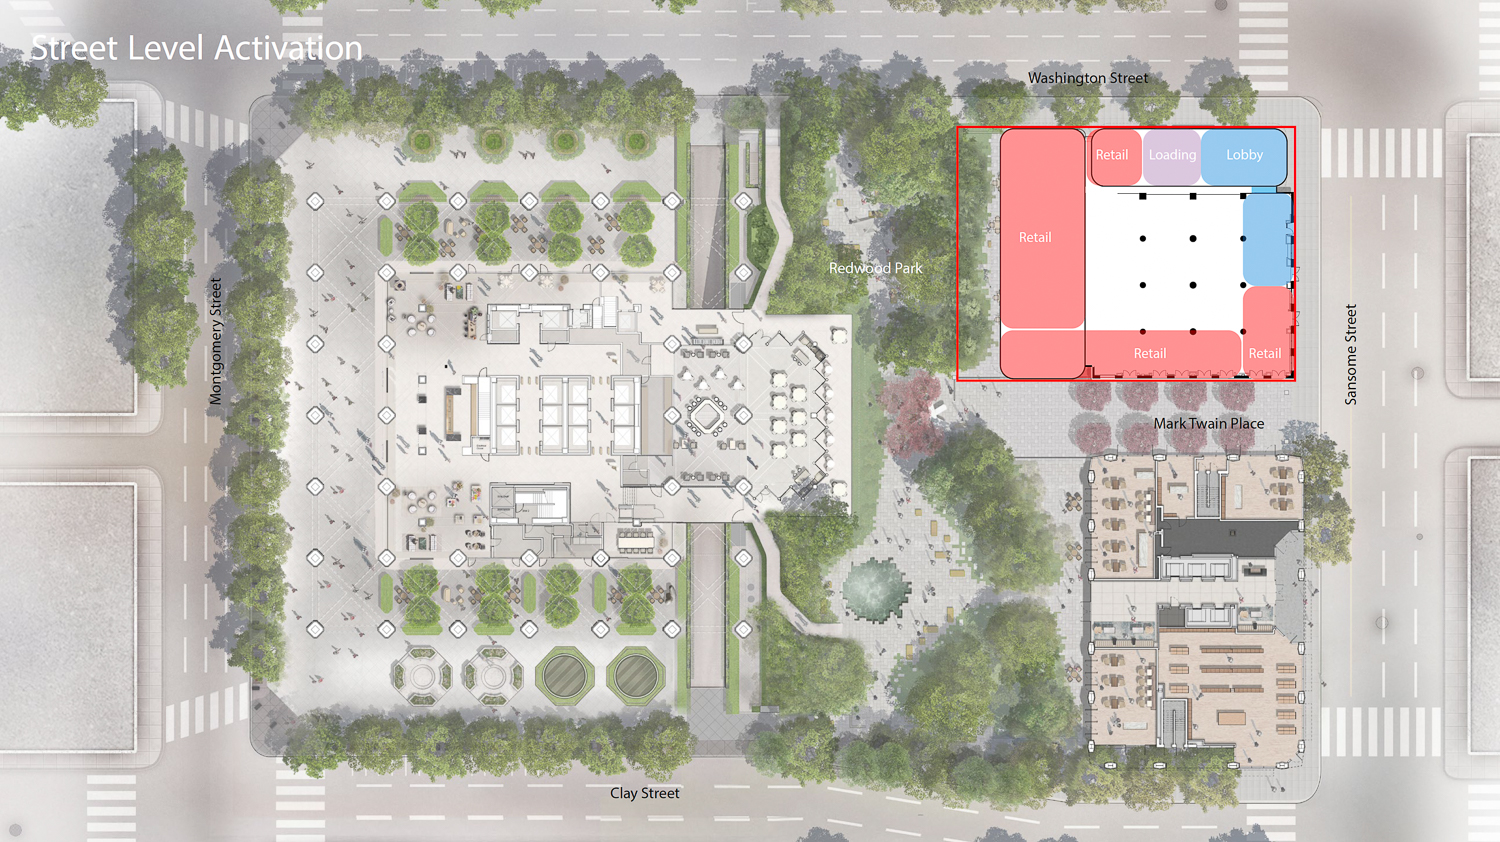 Transamerica complex site map, illustration by Foster + Partners